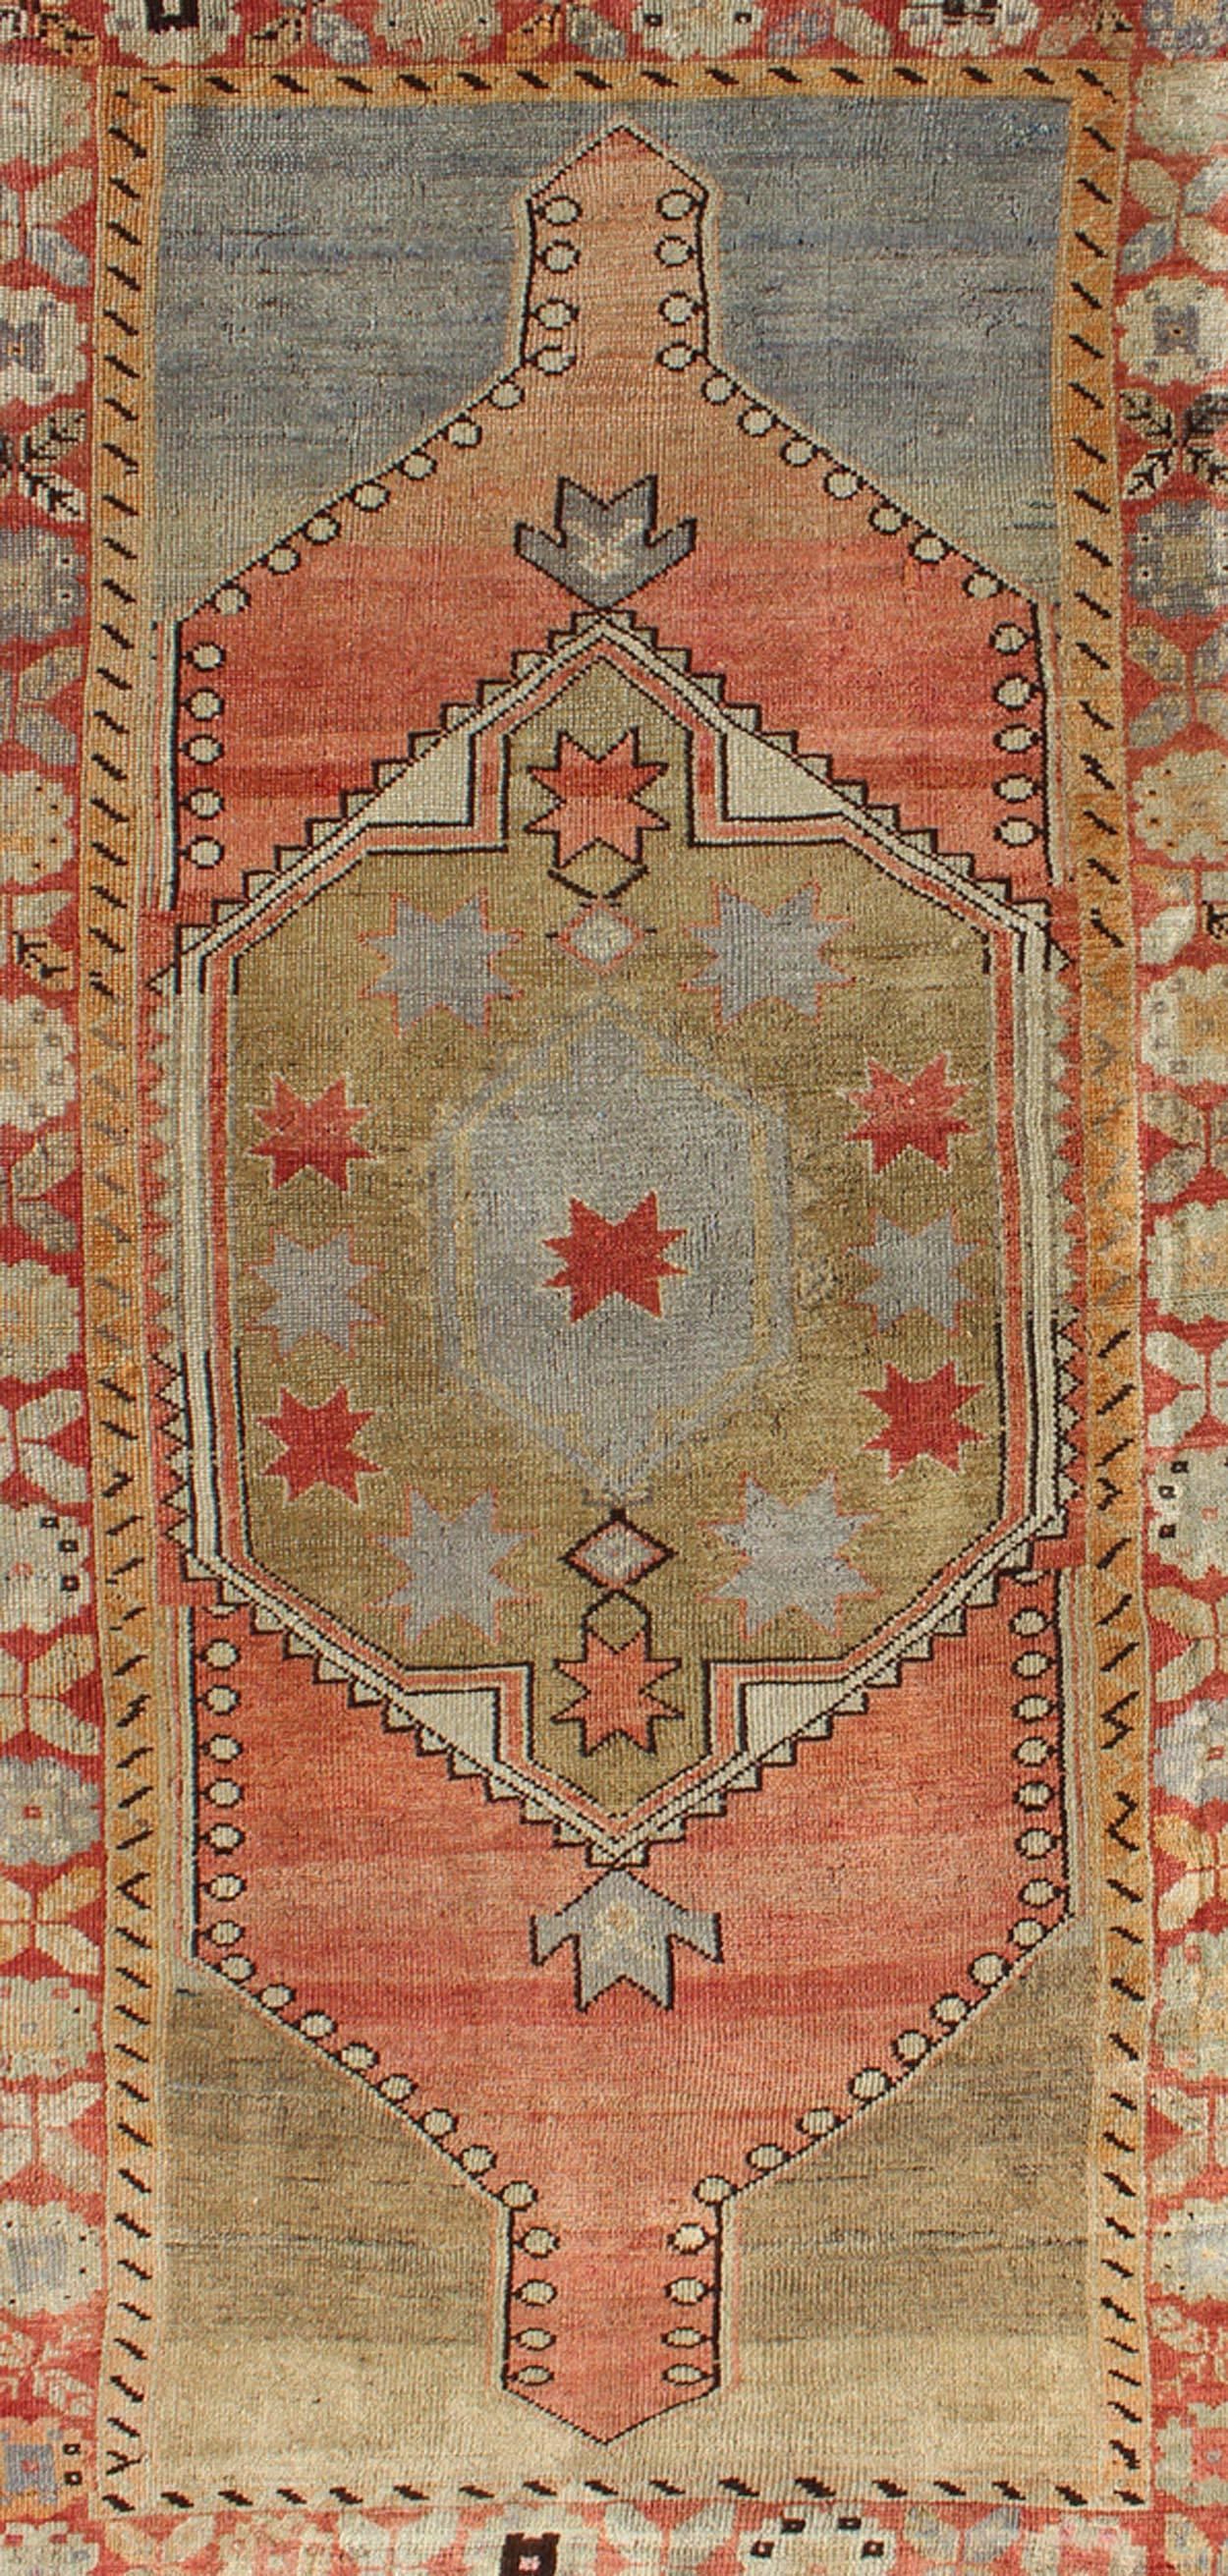 Hand-Knotted Vintage Turkish Oushak Rug in Faded Red, Camel, Light Blue